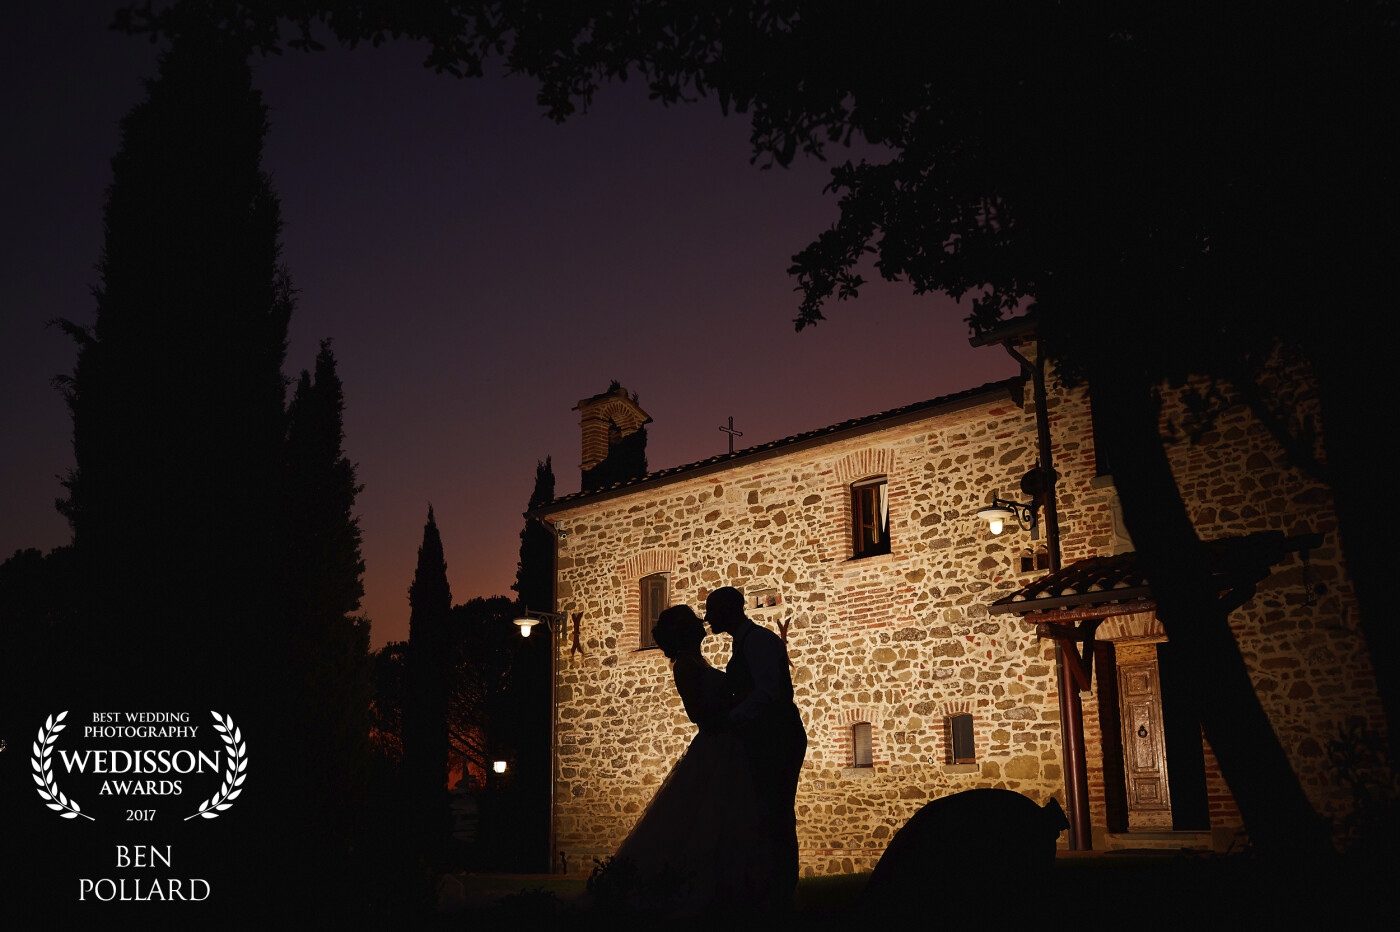 At the end of an amazing wedding in Italy with some incredible sunsets and scenery.I noticed the colour in the sky, put a flash on the building and asked the couple to share a kiss. A simple picture!